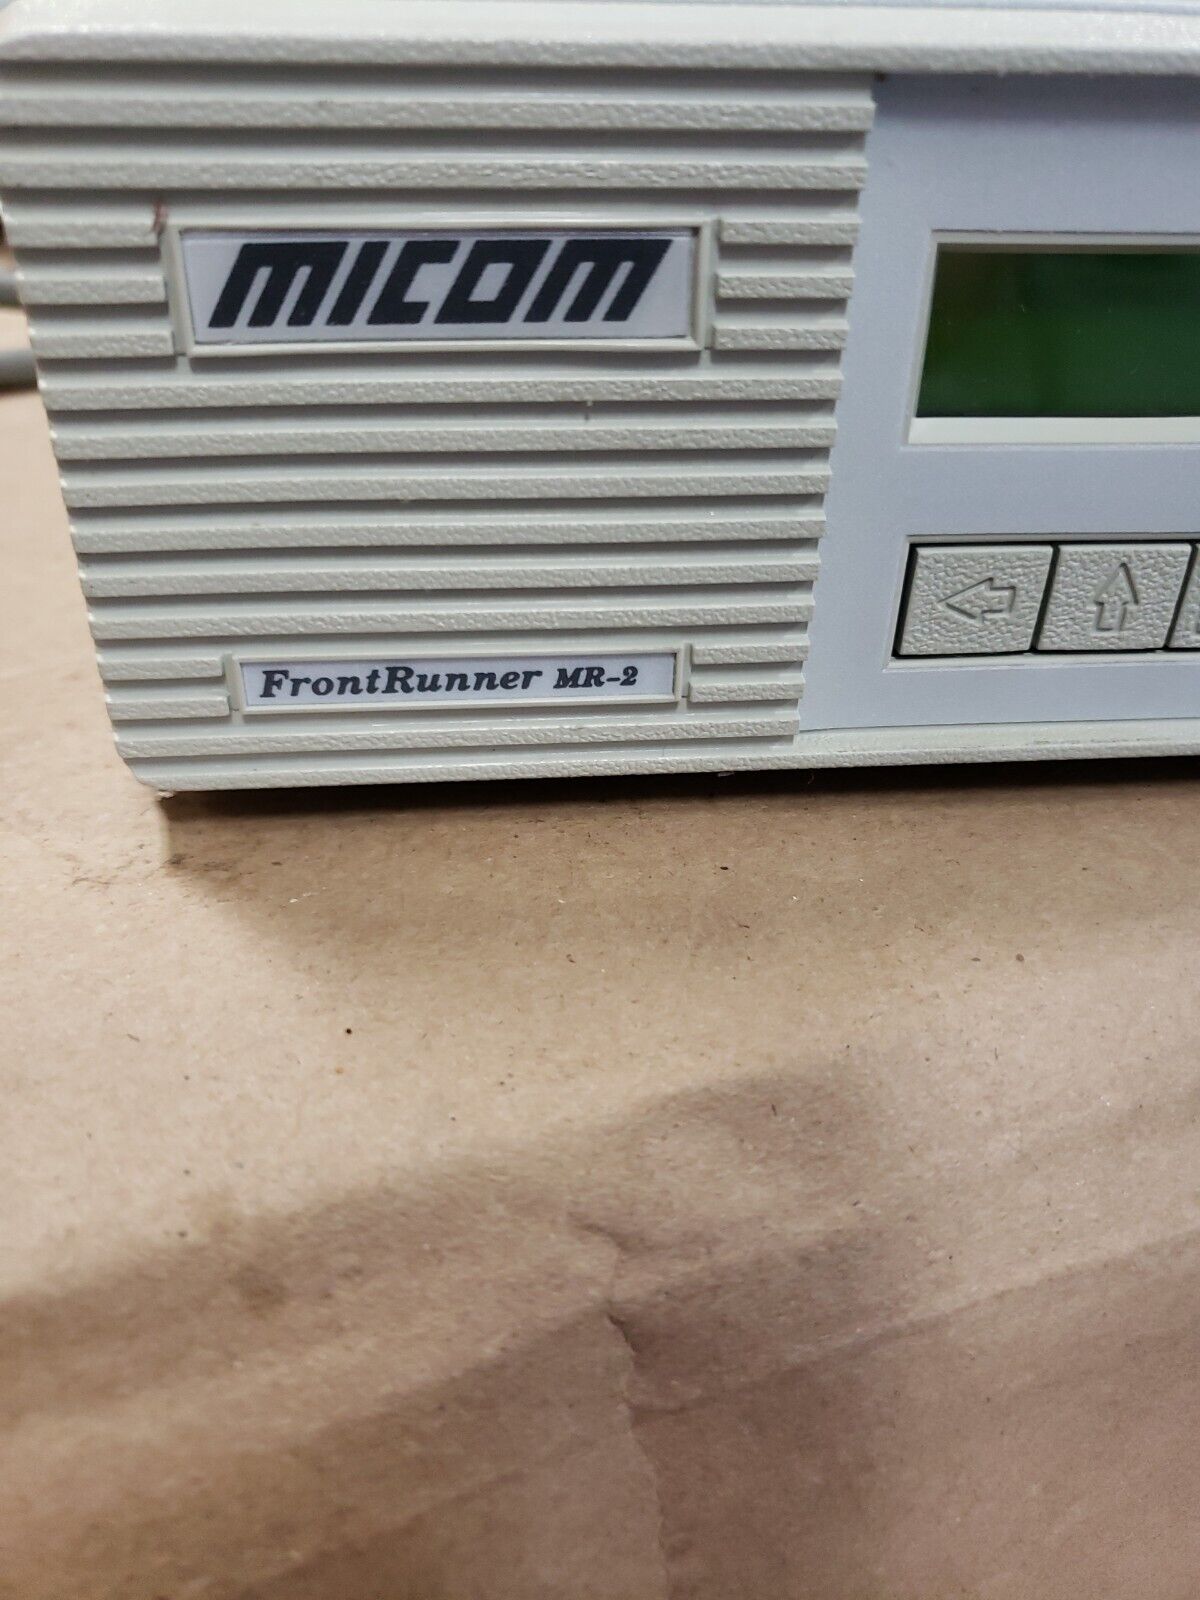 MICOM 5000D FRONTRUNNER MR-2 DIAL BACKUP BOARD WITH AC ADAPTER